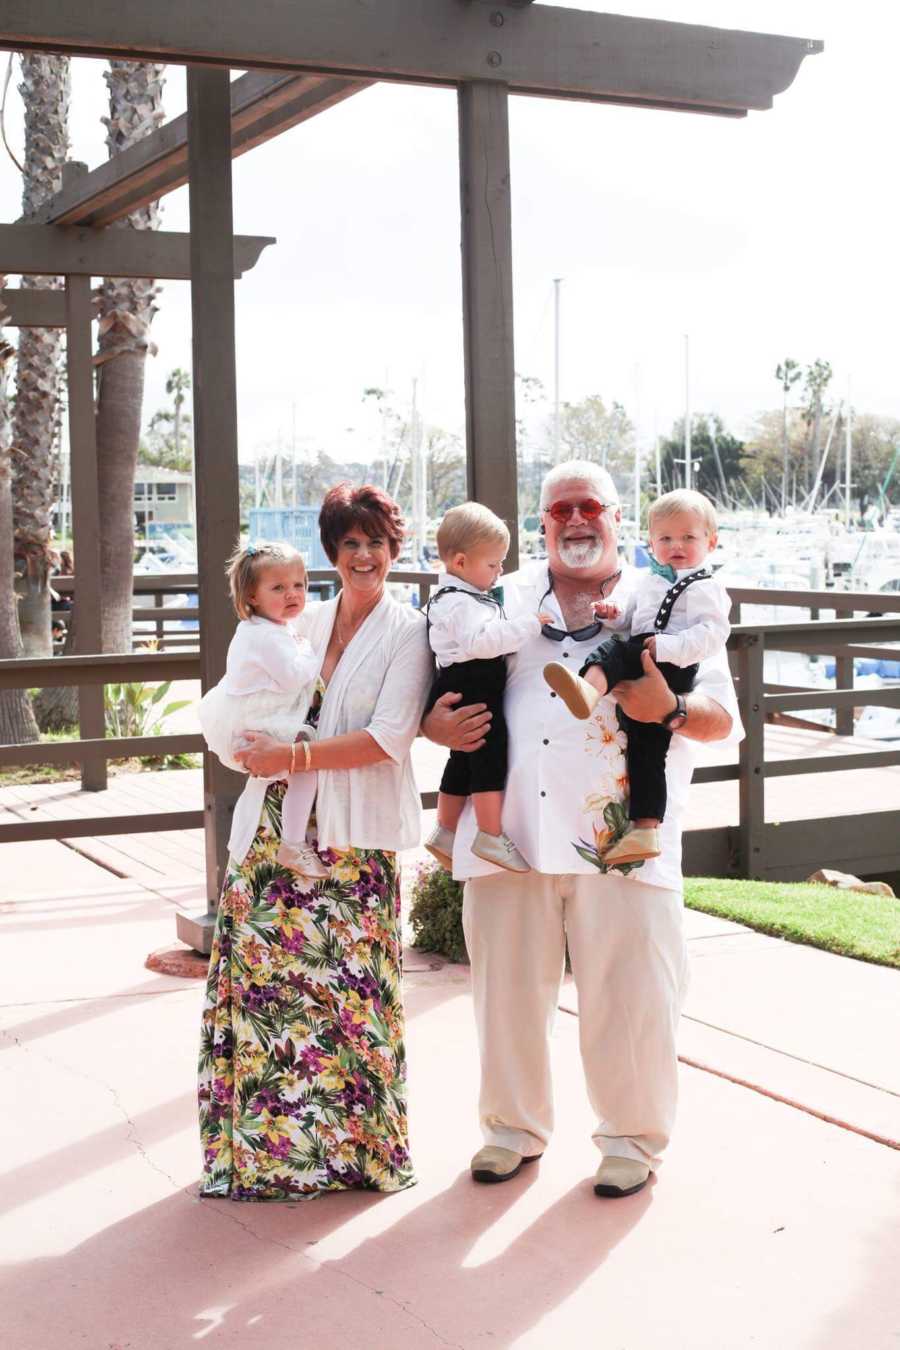 Husband and wife stand outside holding triplets in their arms